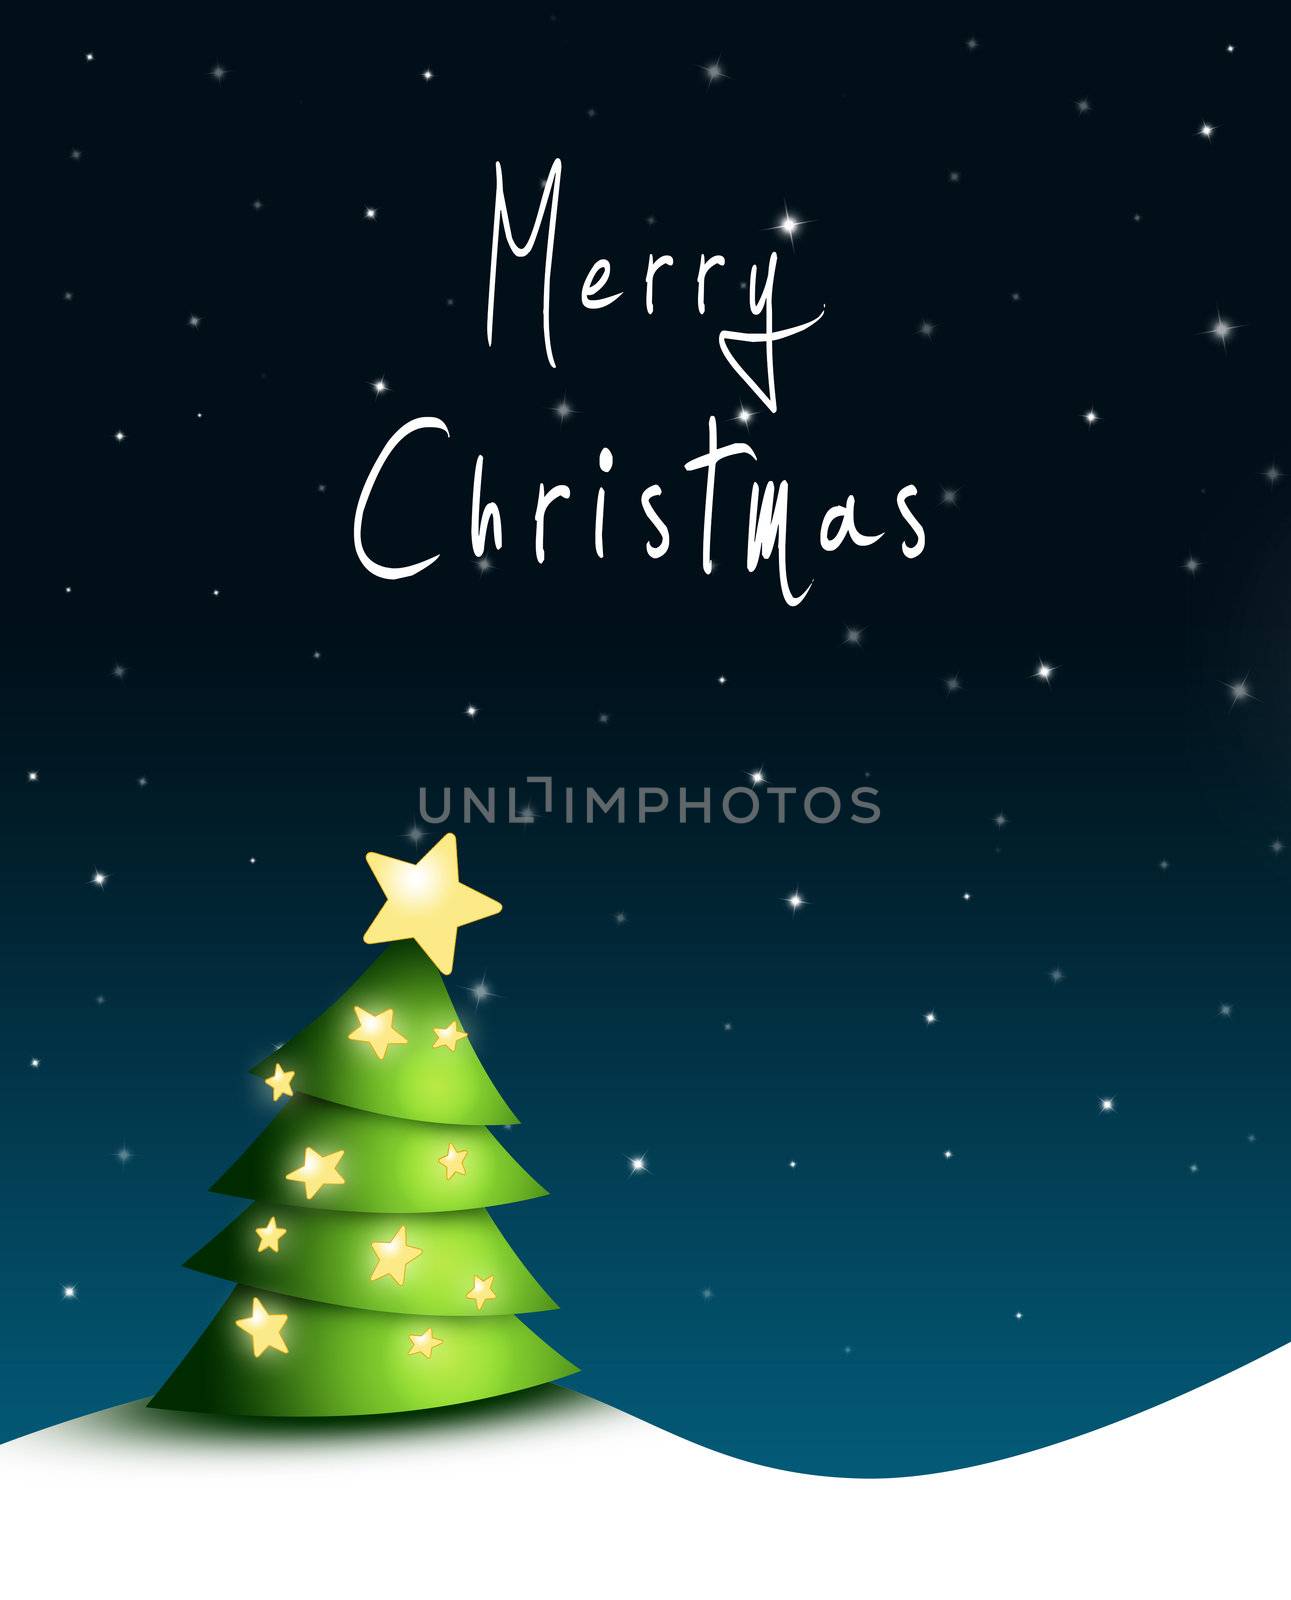 nightly Christmas background with green fir tree, stars and Merry Christmas text